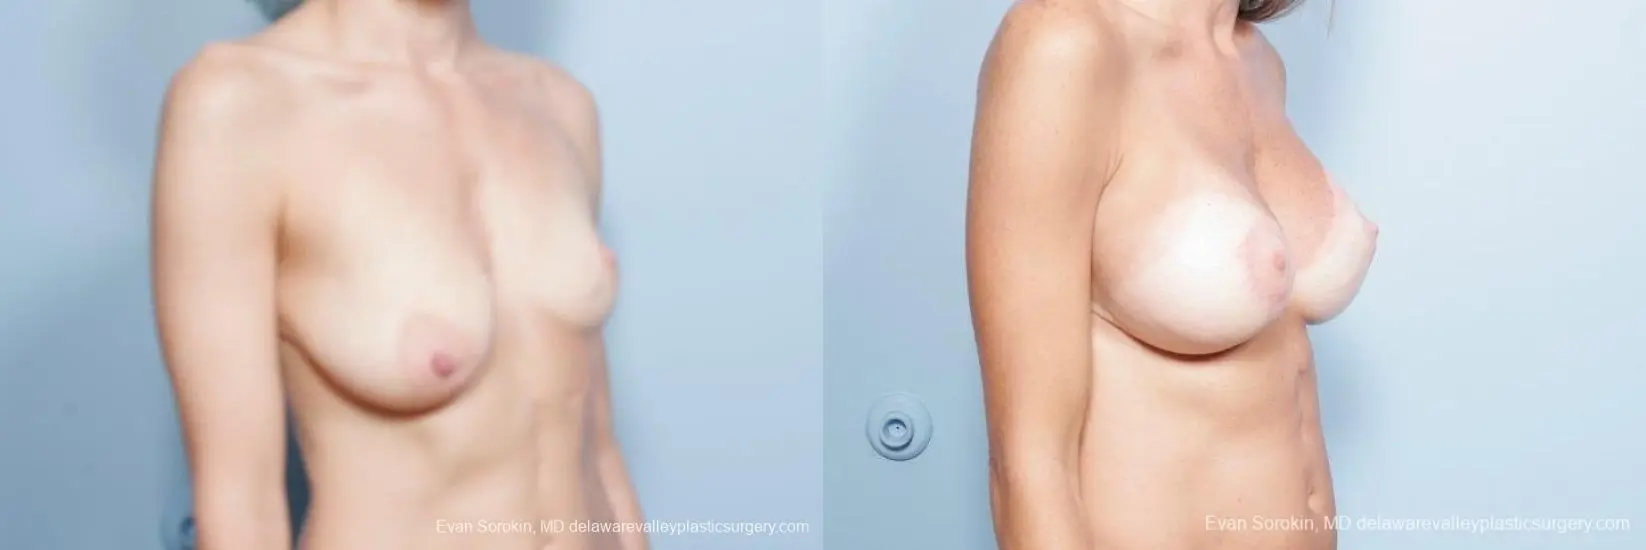 Philadelphia Breast Lift and Augmentation 8694 - Before and After 2